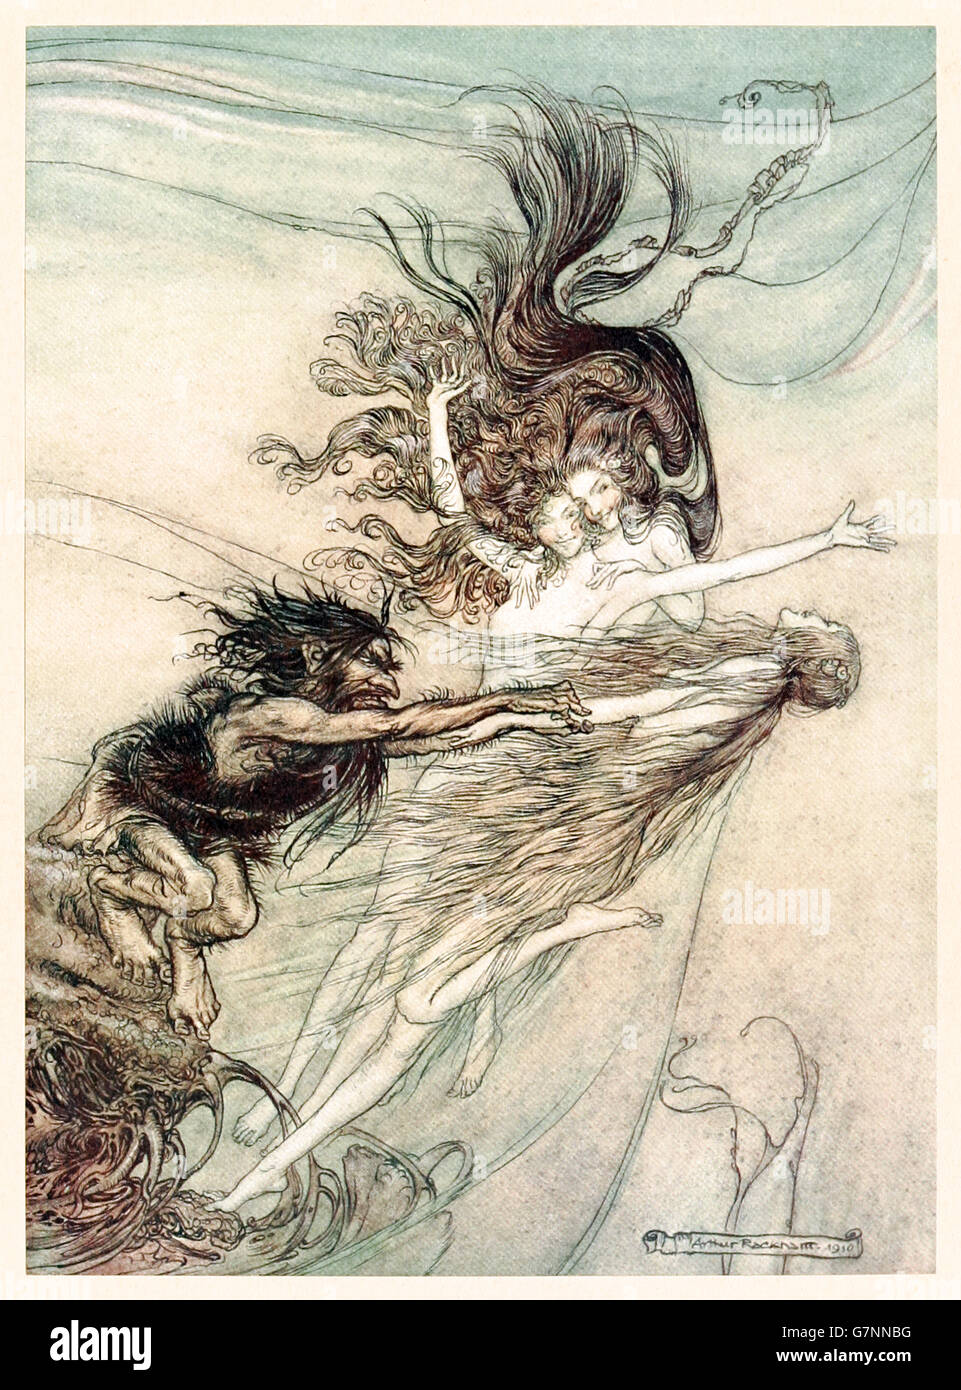 “The Rhine-Maidens teasing Alberich” from ‘The Rhinegold & the Valkyrie’ illustrated by Arthur Rackham (1867-1939), published in 1910. Woglinde, Wellgunde and Flosshilde frolic and tease the Nibelung Alberich. Stock Photo